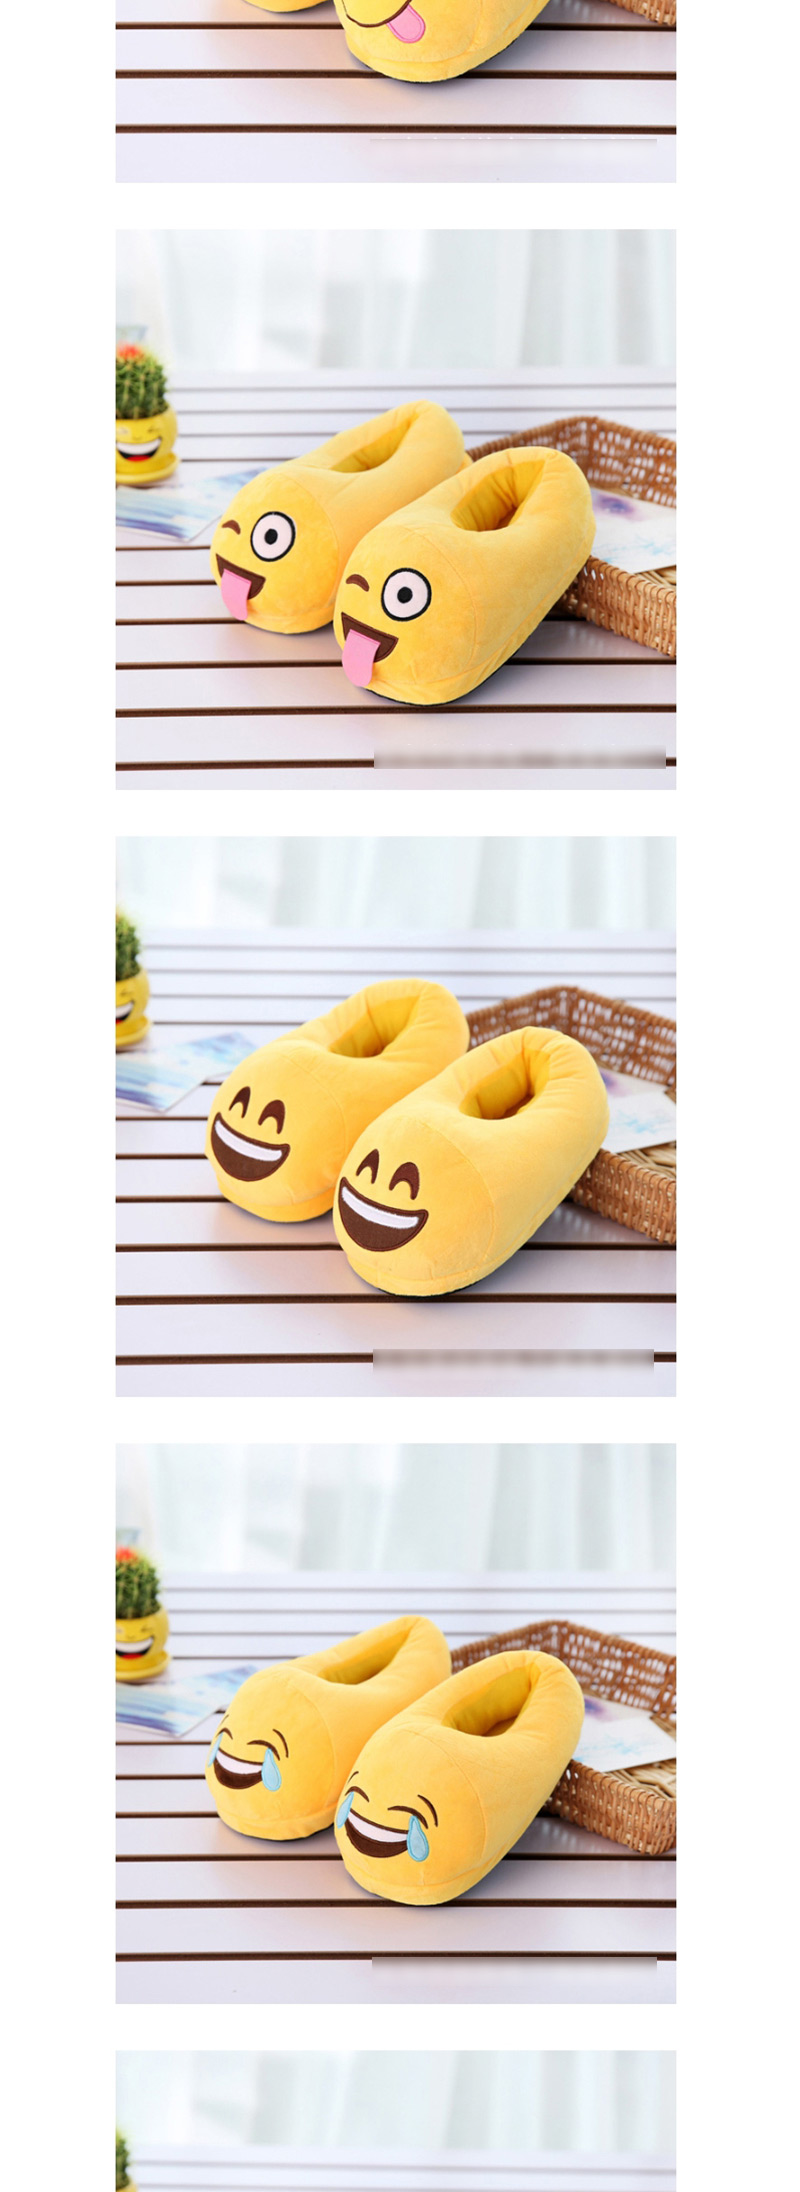 Fashion 13 Purple Cartoon Expression Plush Bag With Cotton Slippers,Slippers